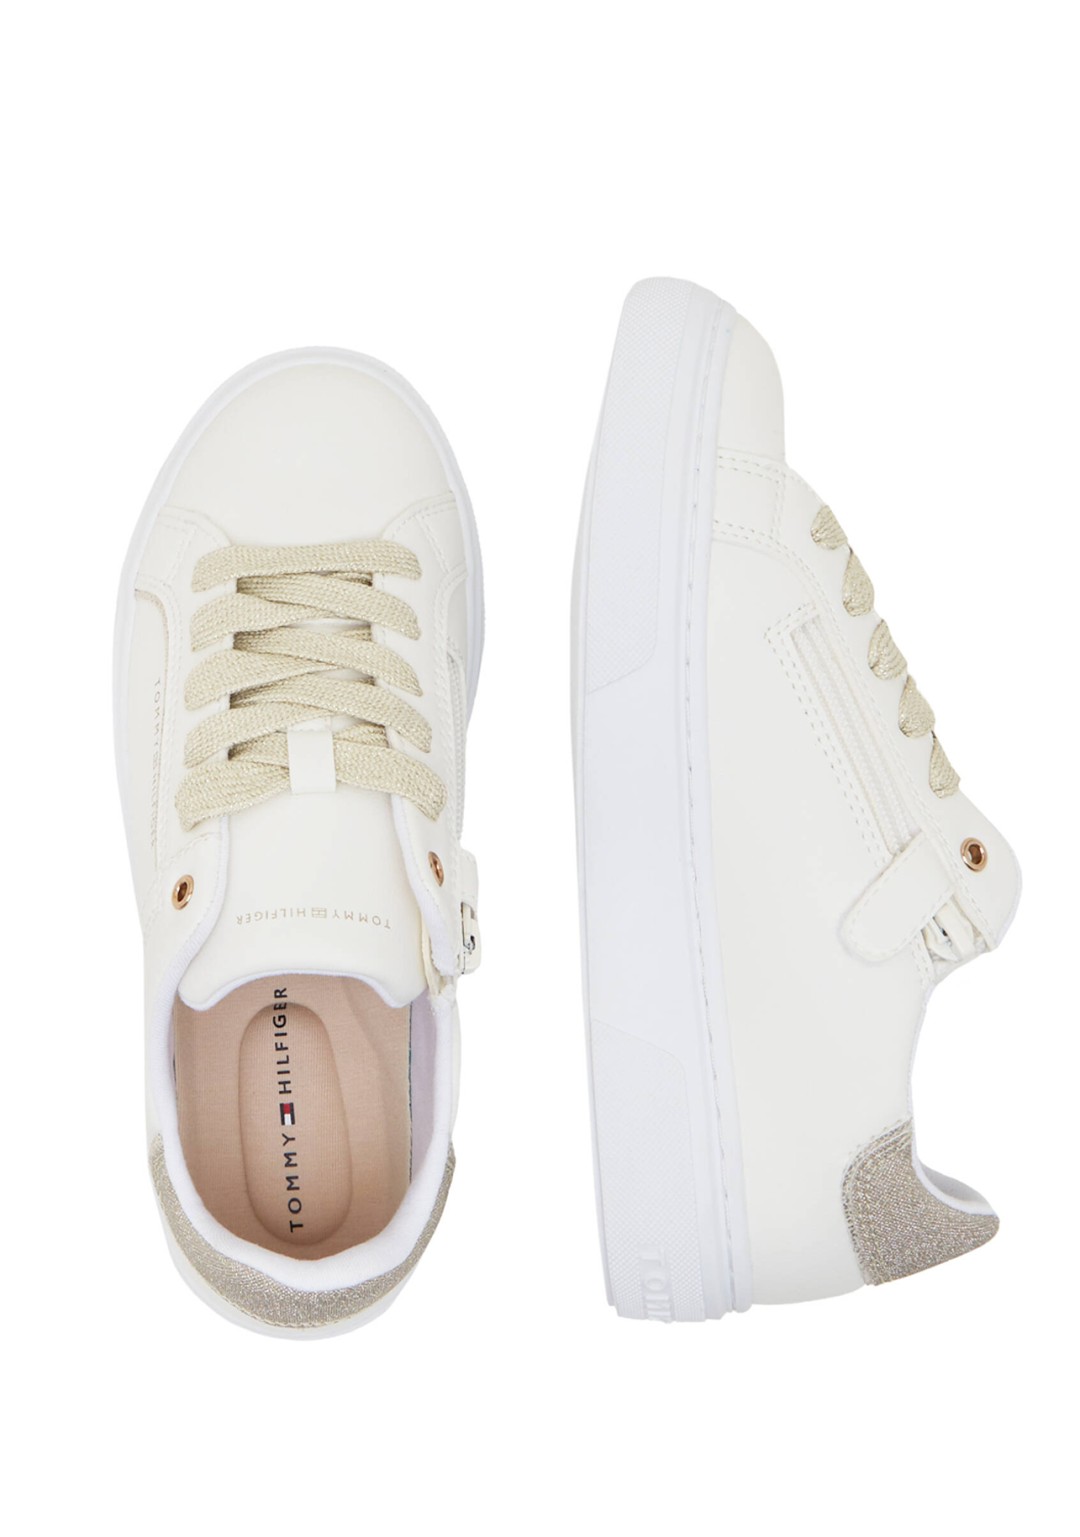 TOMMY HILFIGER - Sneakers Rip.Glitter - Donna - T3A9 - 33206